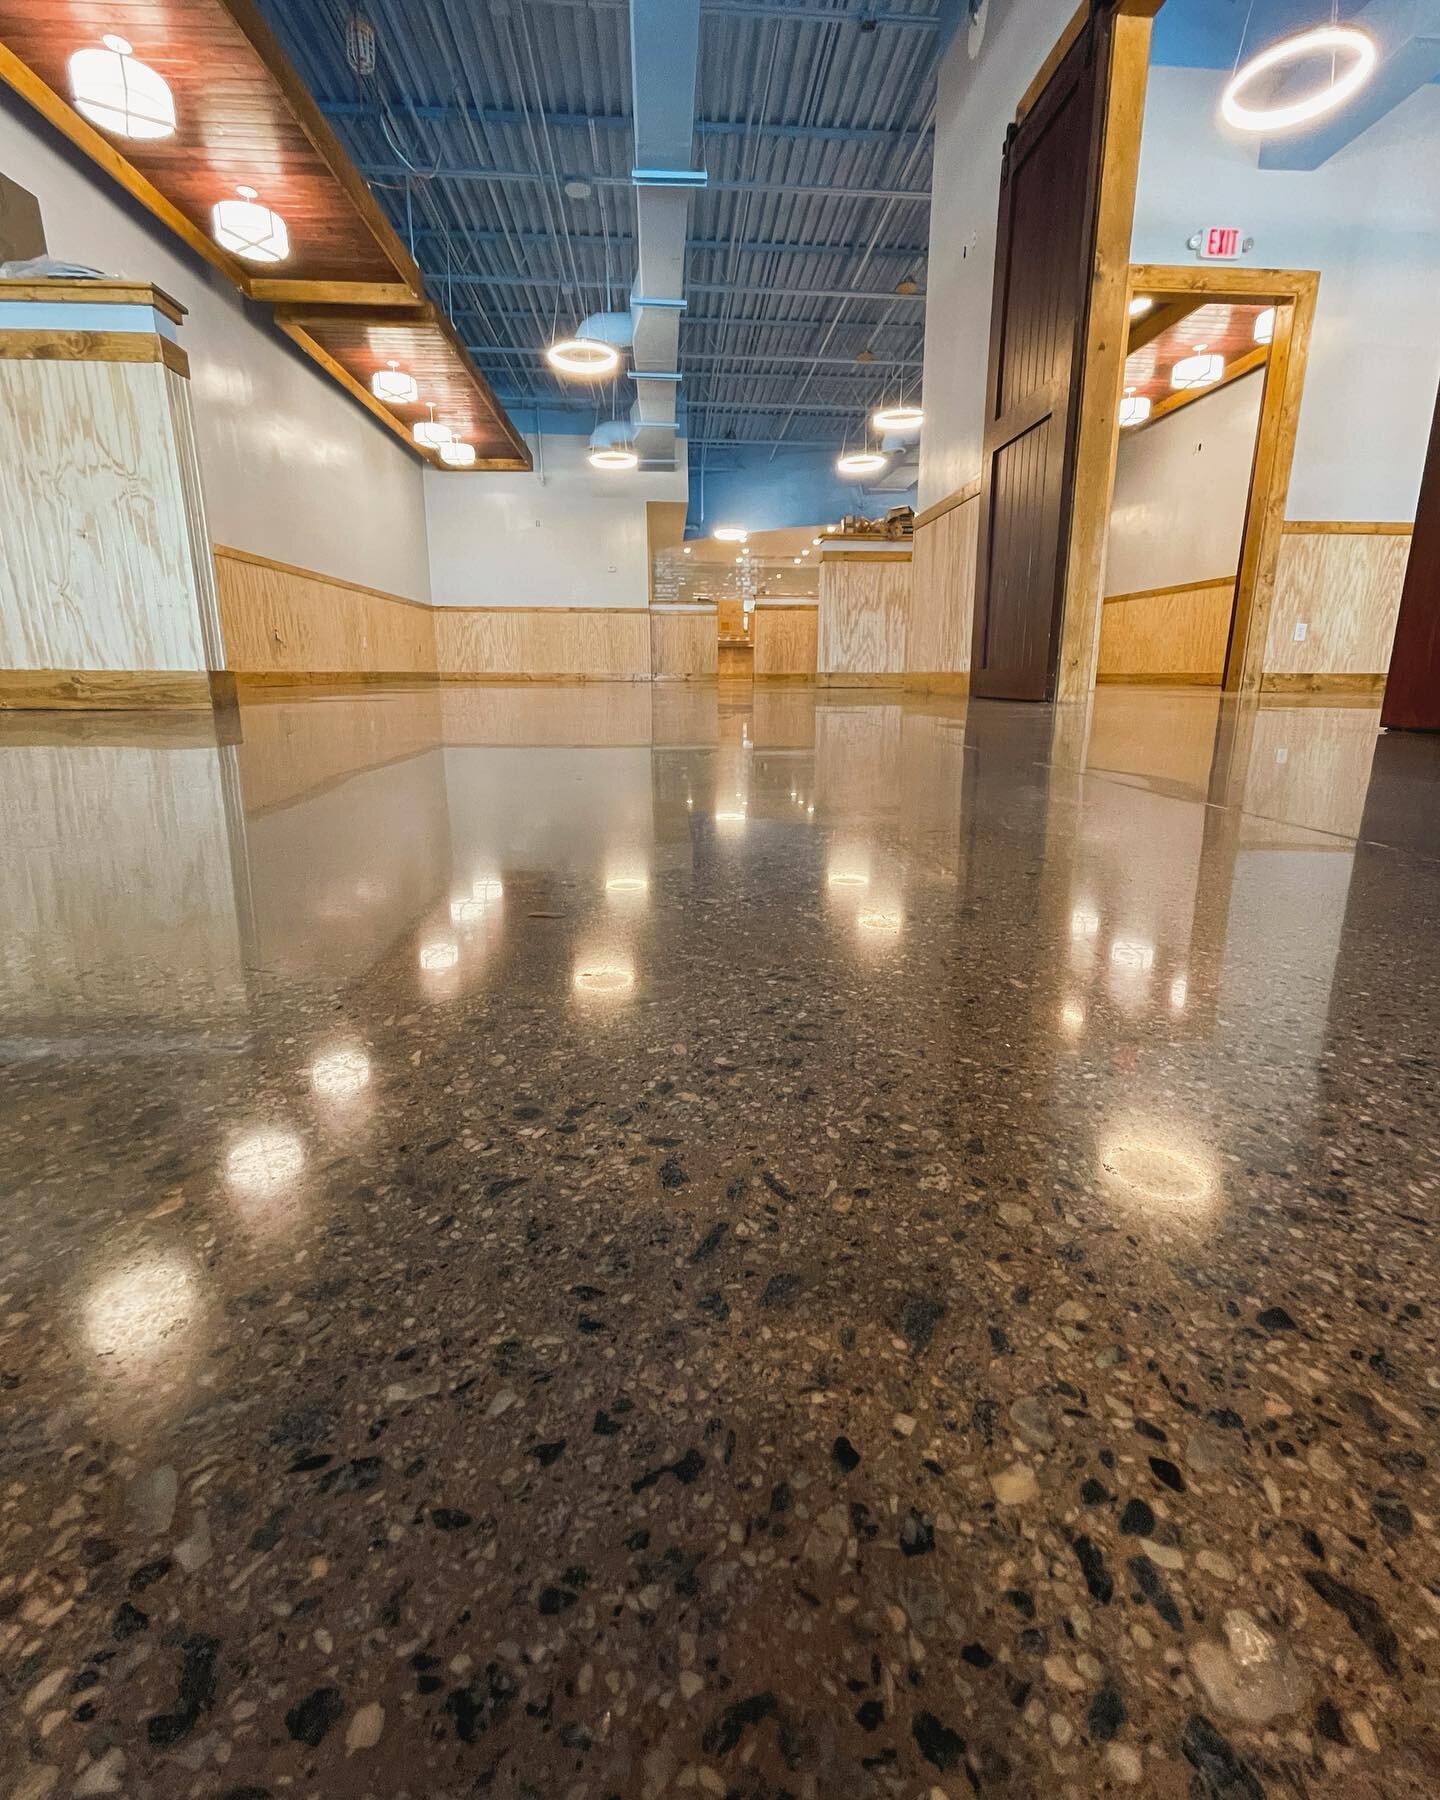 Polished concrete for this high-traffic restaurant in Atlanta. ✨ 

More and more, mechanically polished concrete continuously performs and *outshines* other flooring options as the right solution for reduced environmental impact, long-term internal b